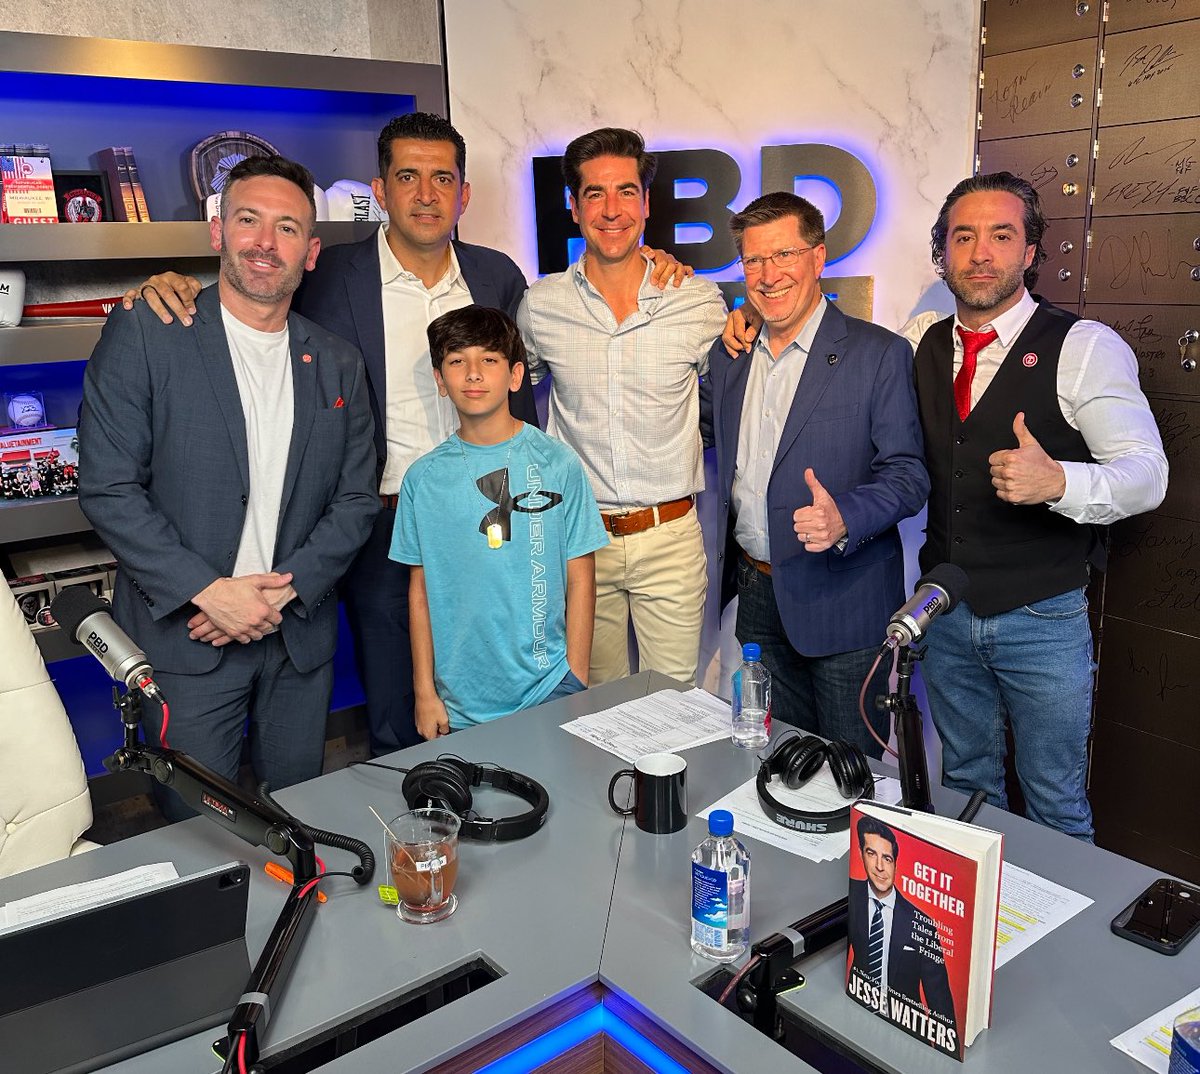 What a great @PBDsPodcast with a great guy. @JesseBWatters The Future Definitely Looks Bright 😎